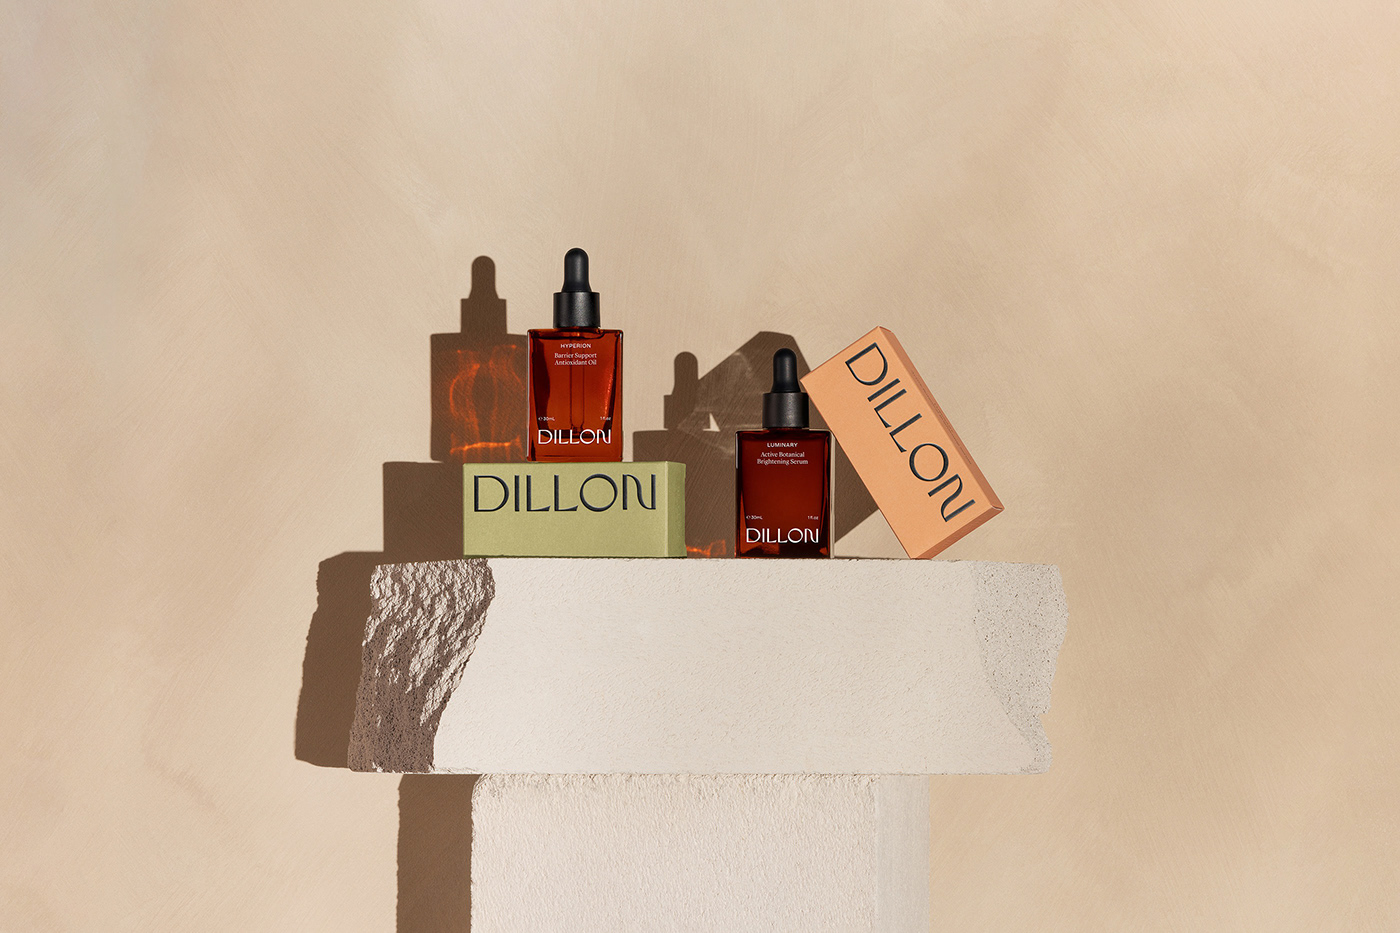 Two product boxes by Dillon skincare sit with two beauty products on a cream brick